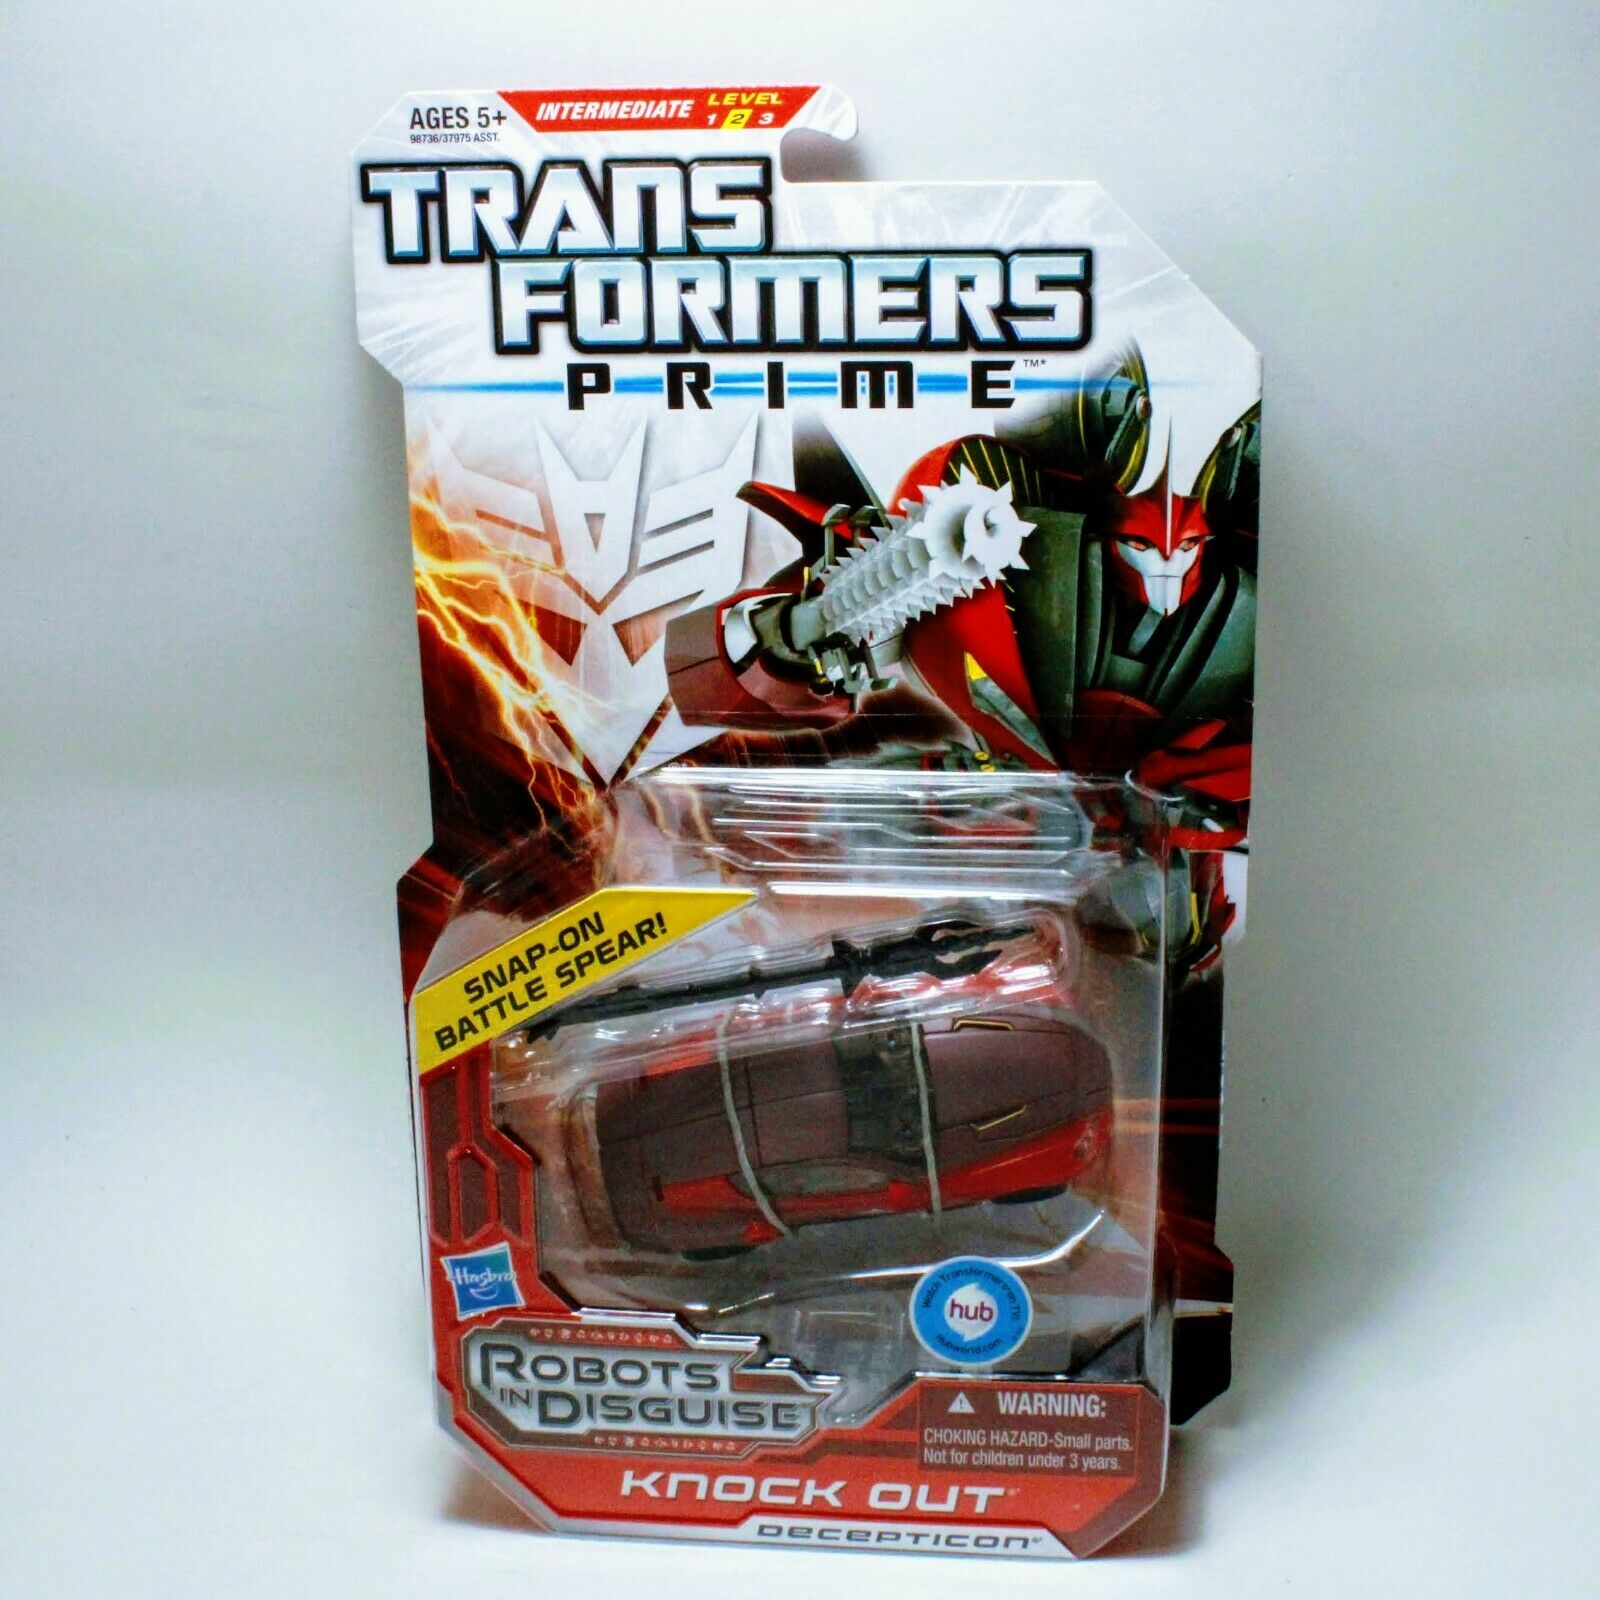 Transformers Prime Knockout - Robots in Disguise RID Knock Out Deluxe Figure